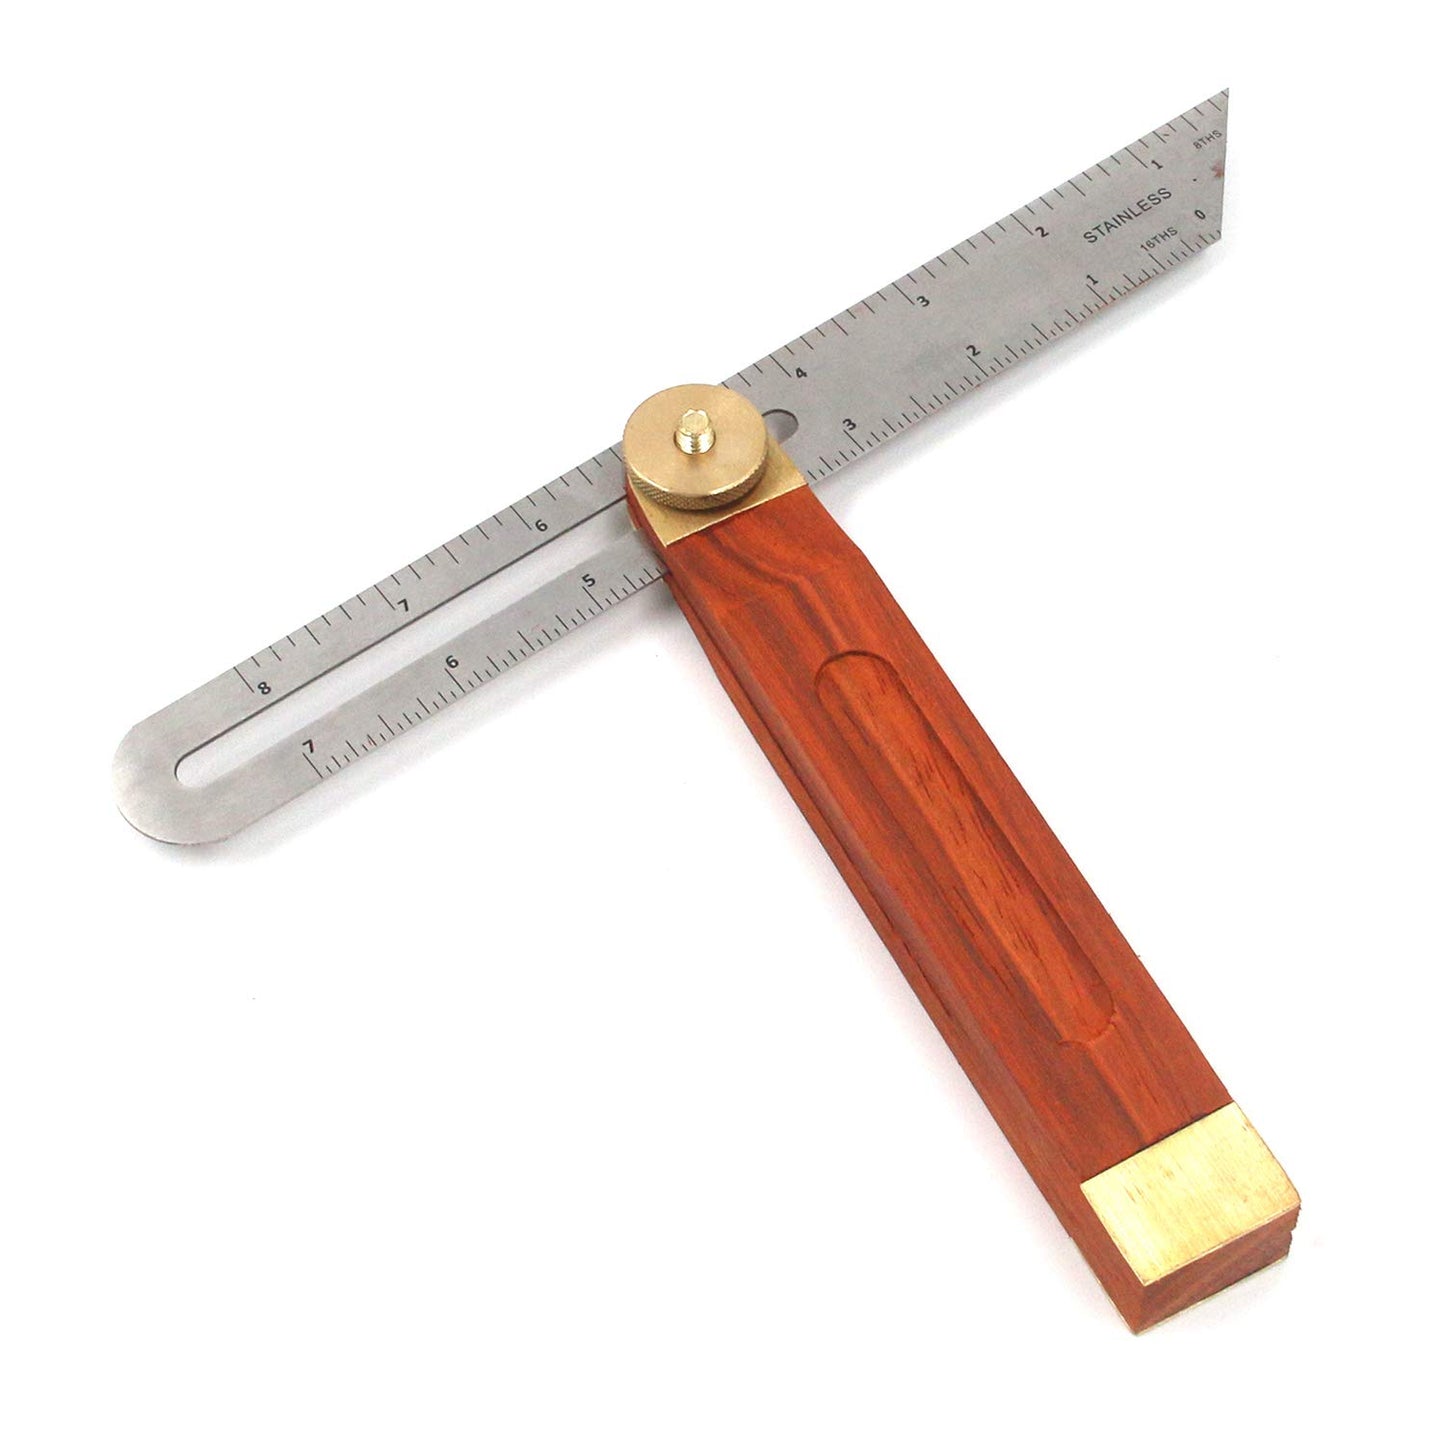 MY MIRONEY 9" T-Bevel Sliding Angle Ruler Protractor Multi Angle Adjustable Gauge Measurement Tool Hardwood Handle with Metric & Imperial Marks